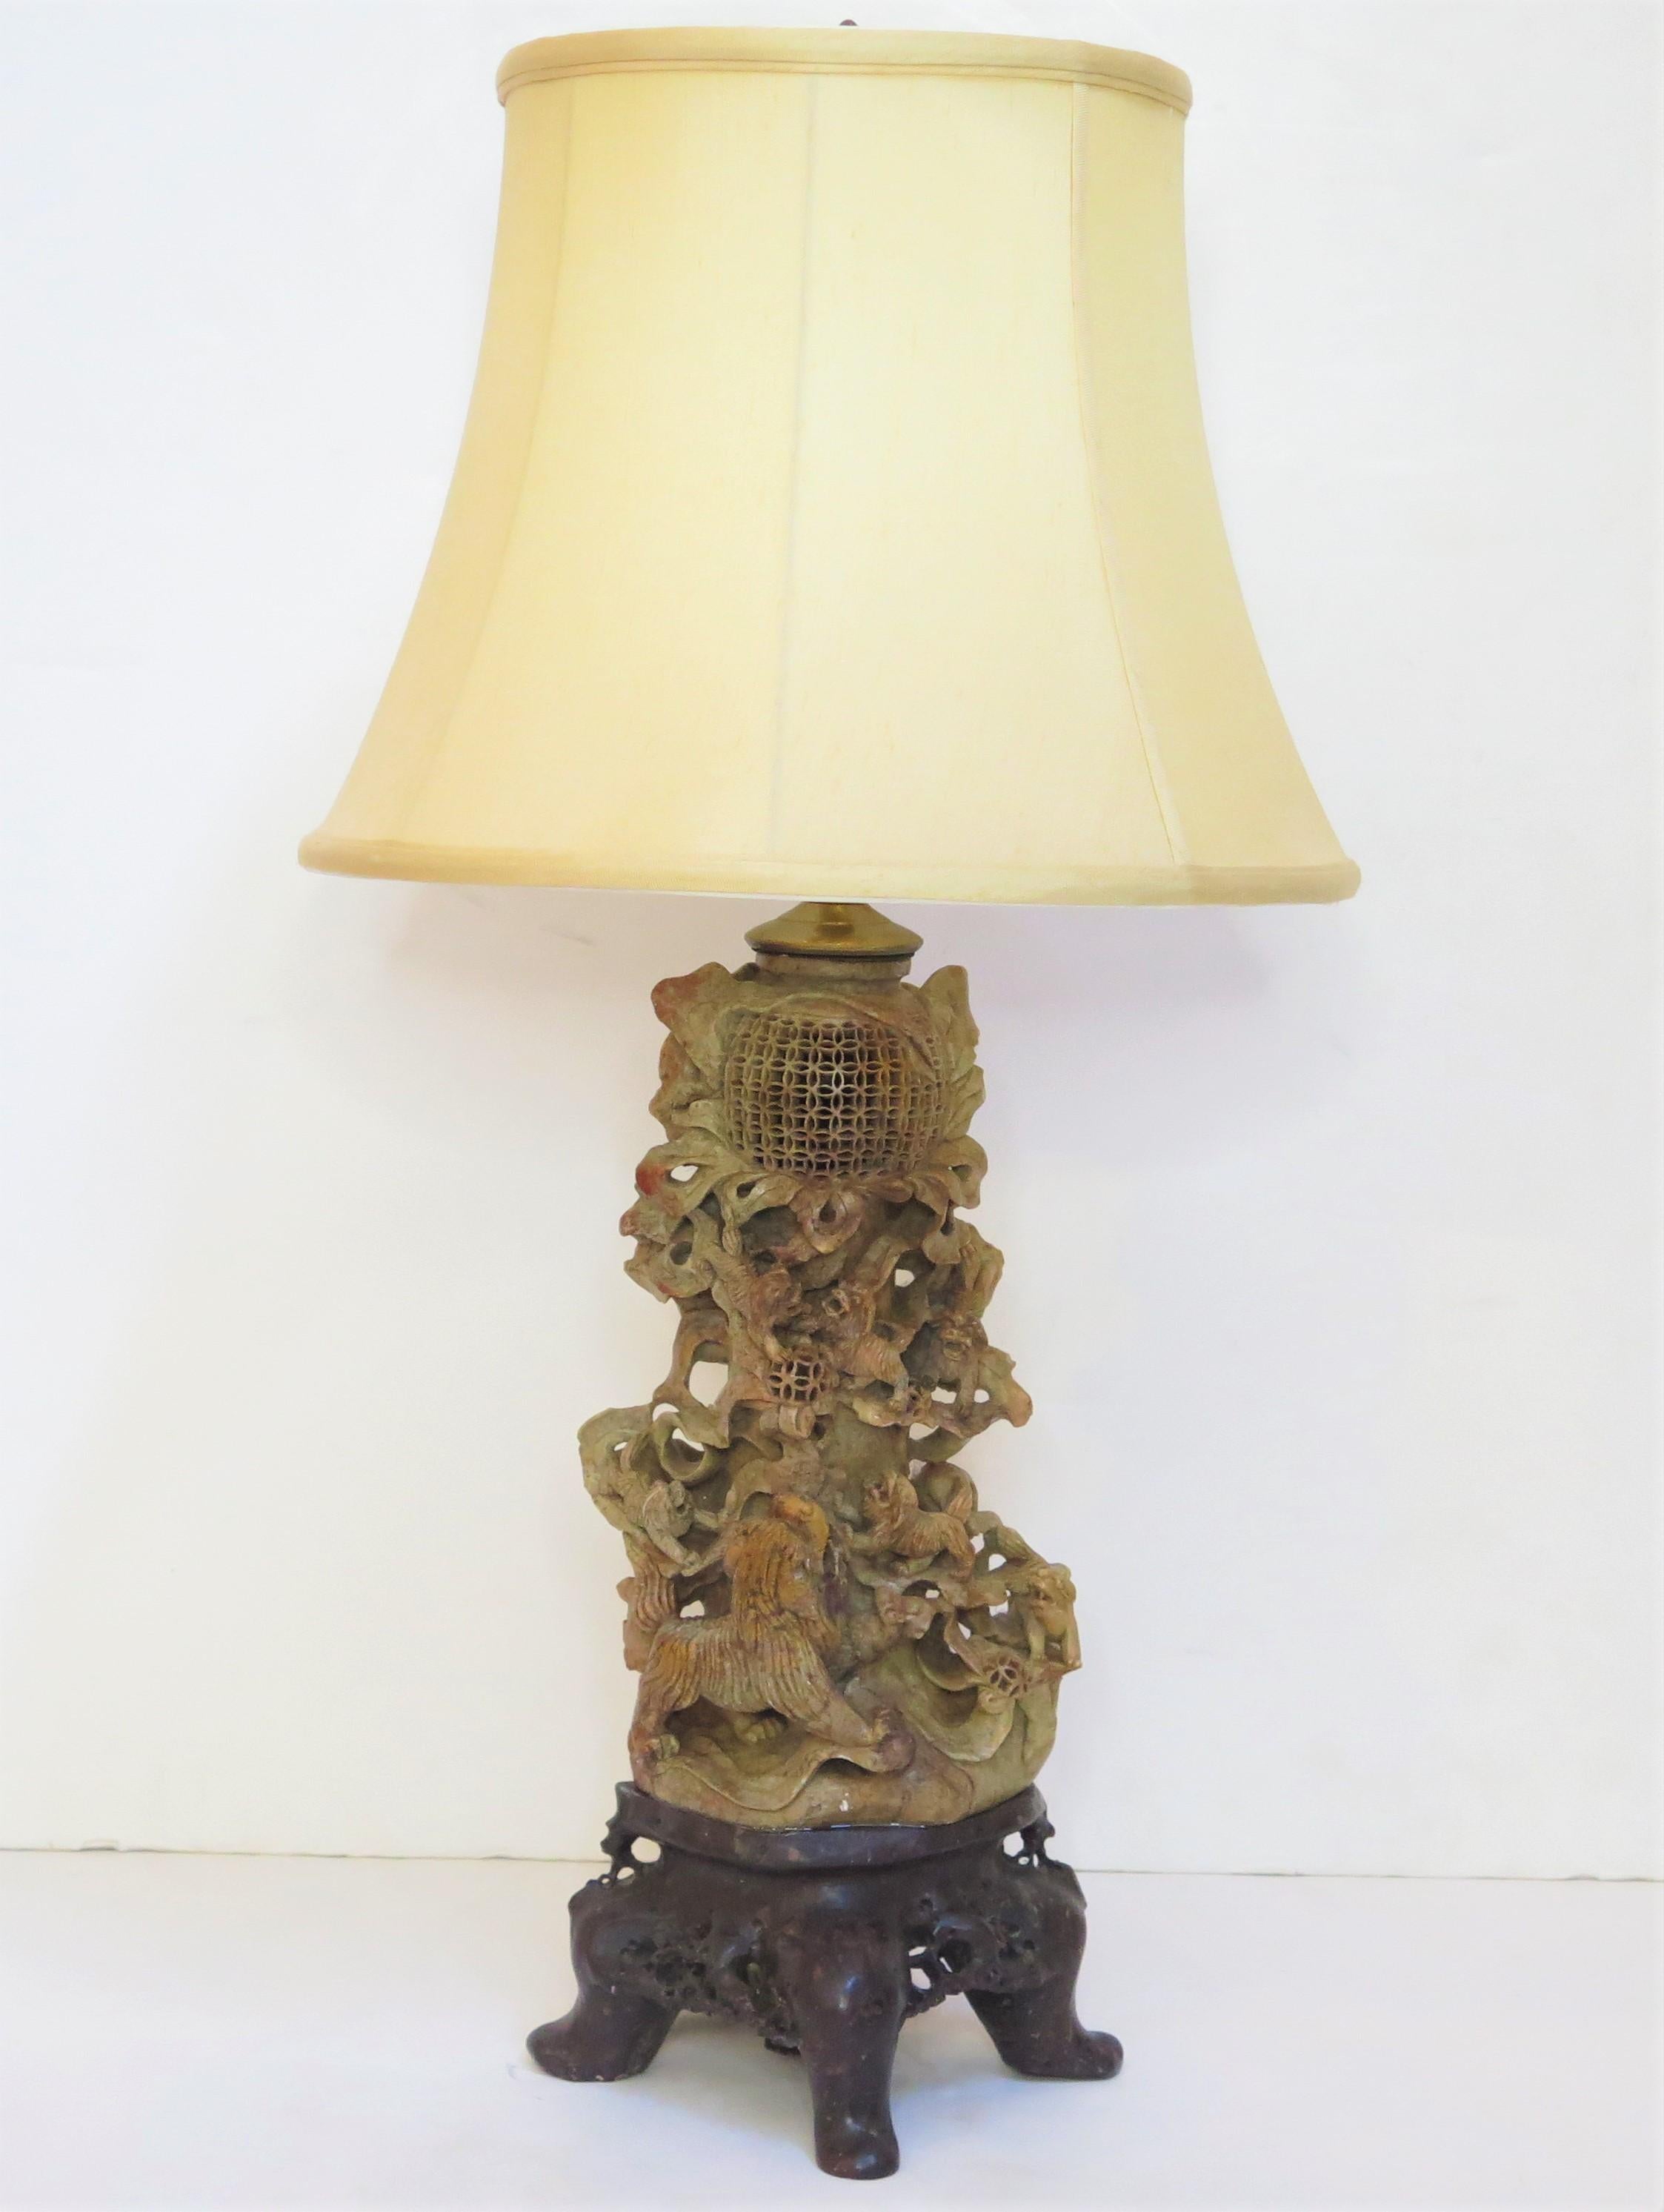 ain intricately carved Chinese soapstone vase as custom table lamp with six (6) foo dogs chasing a ball, brownish-tan coloring, on a darker carved base with four feet, China, 1920s

MEASUREMENTS; 

28